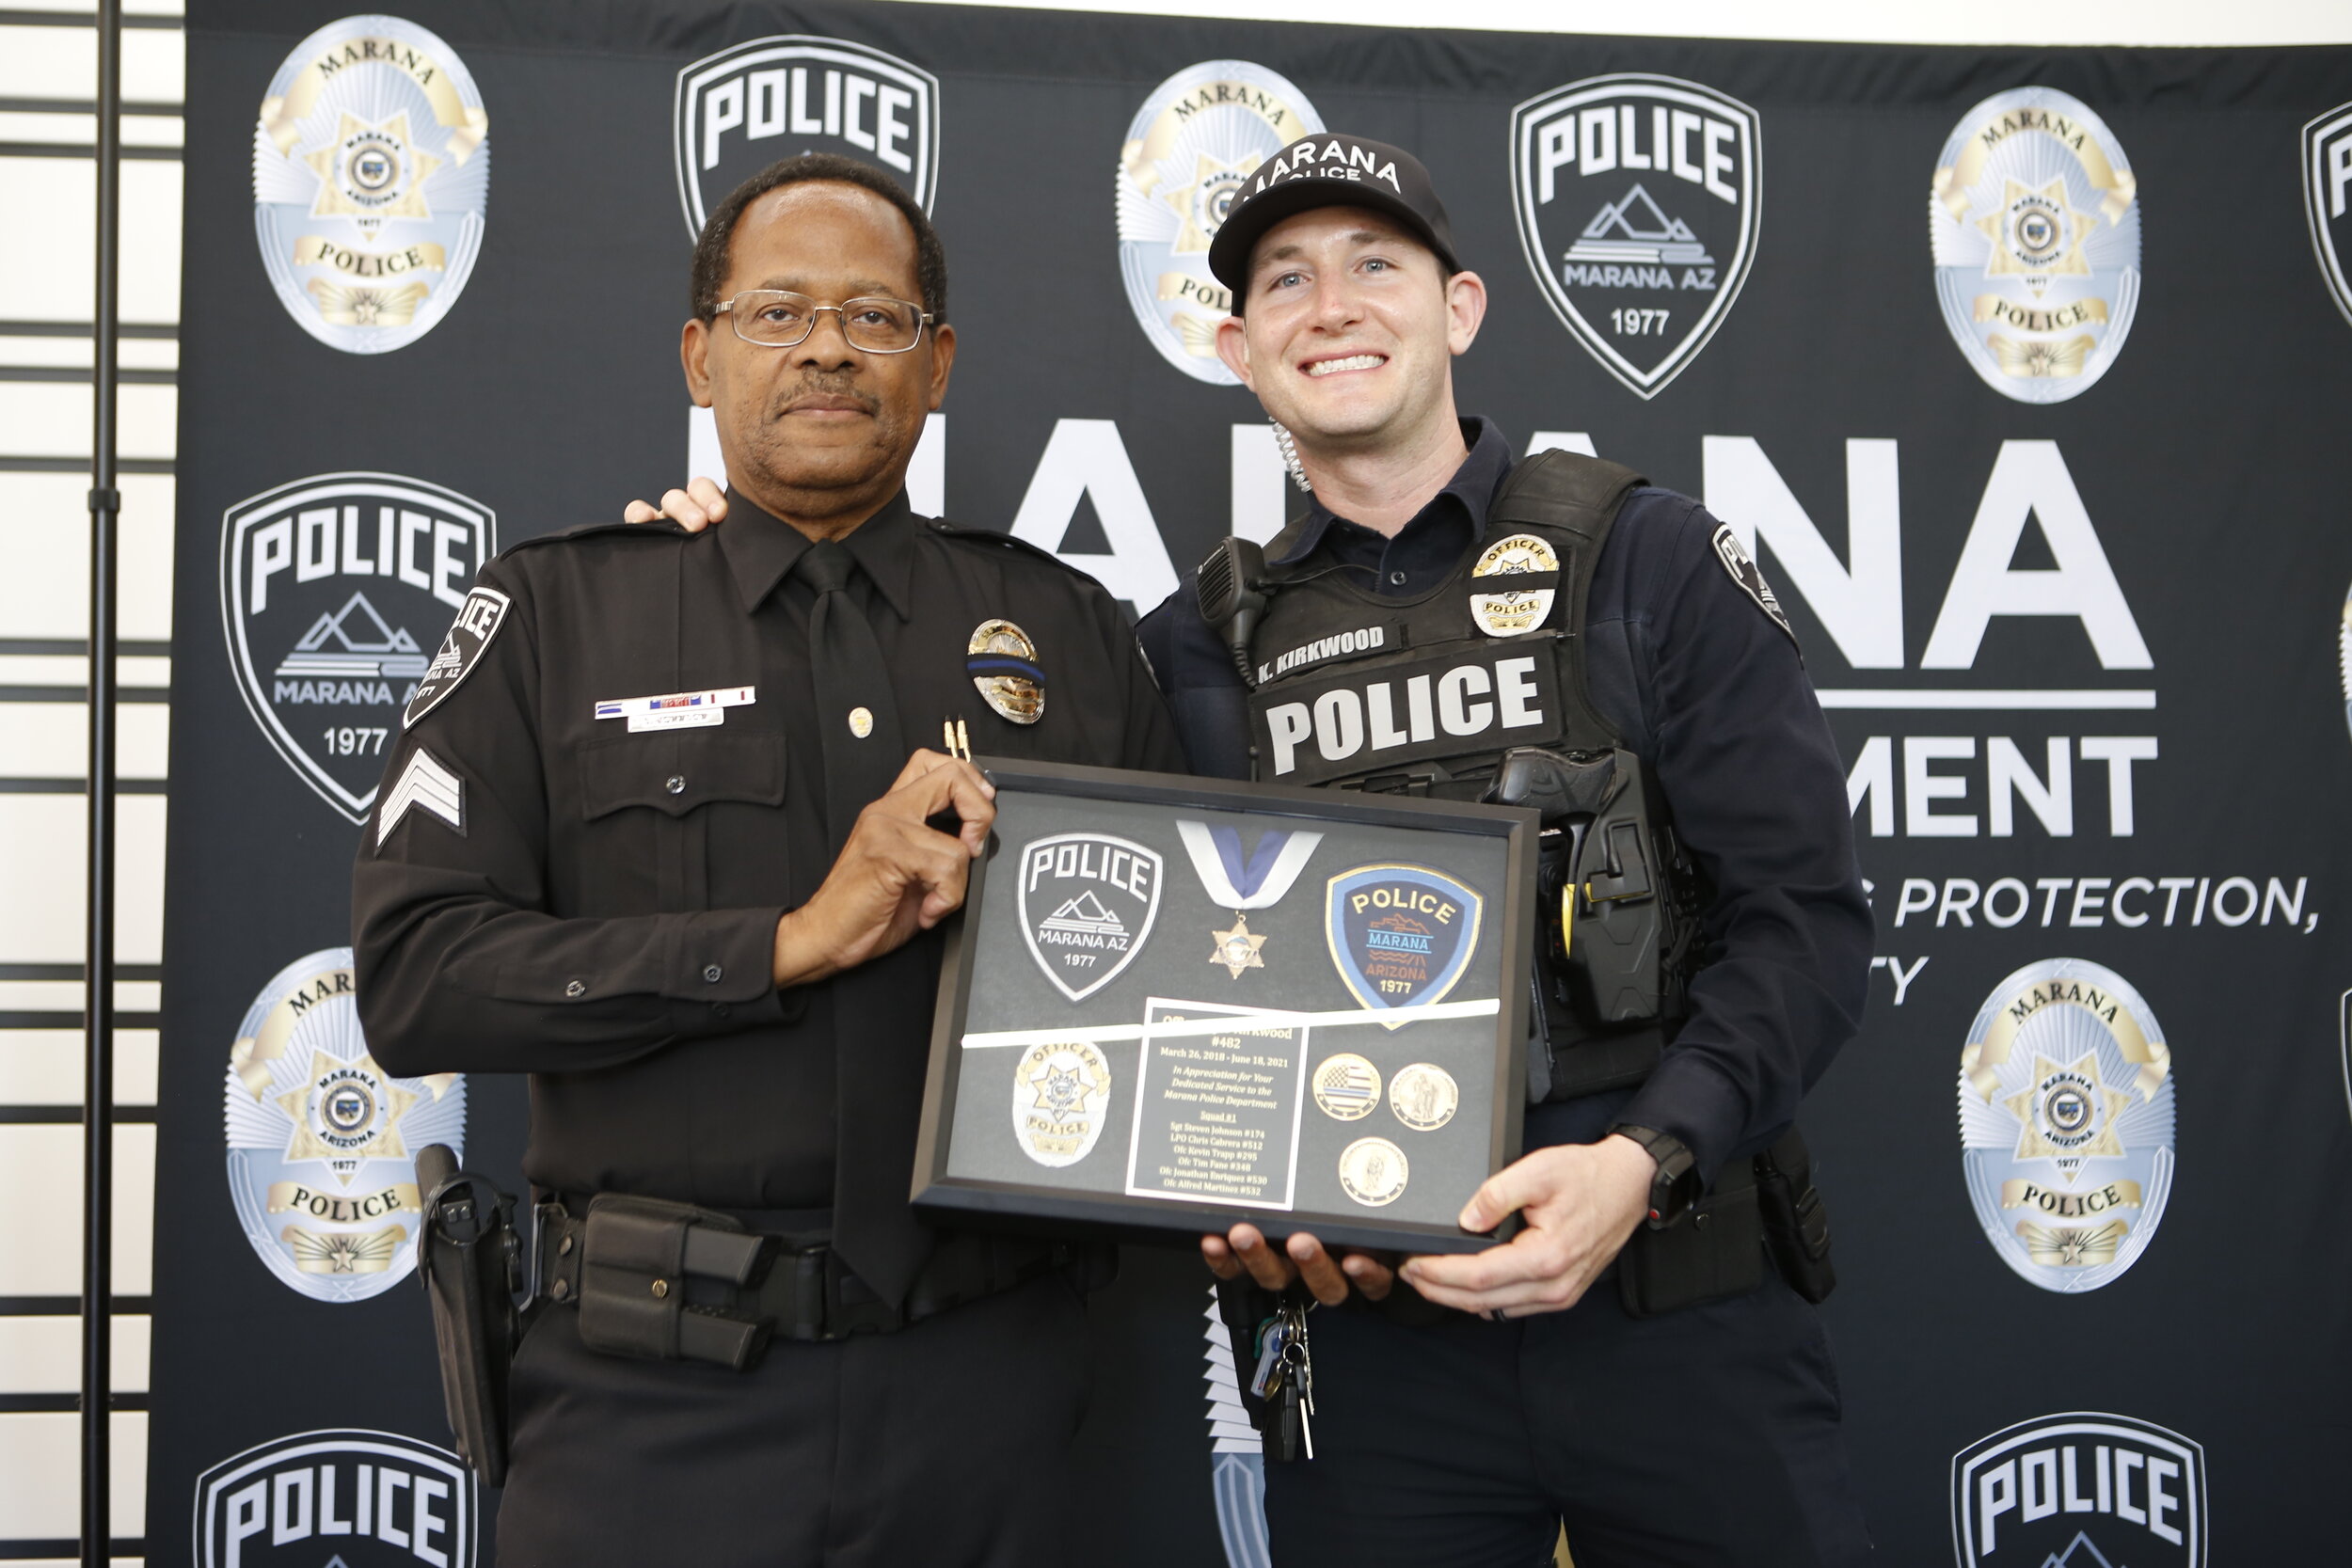  Sergeant Johnson (left) and Officer Kirkwood (right) 